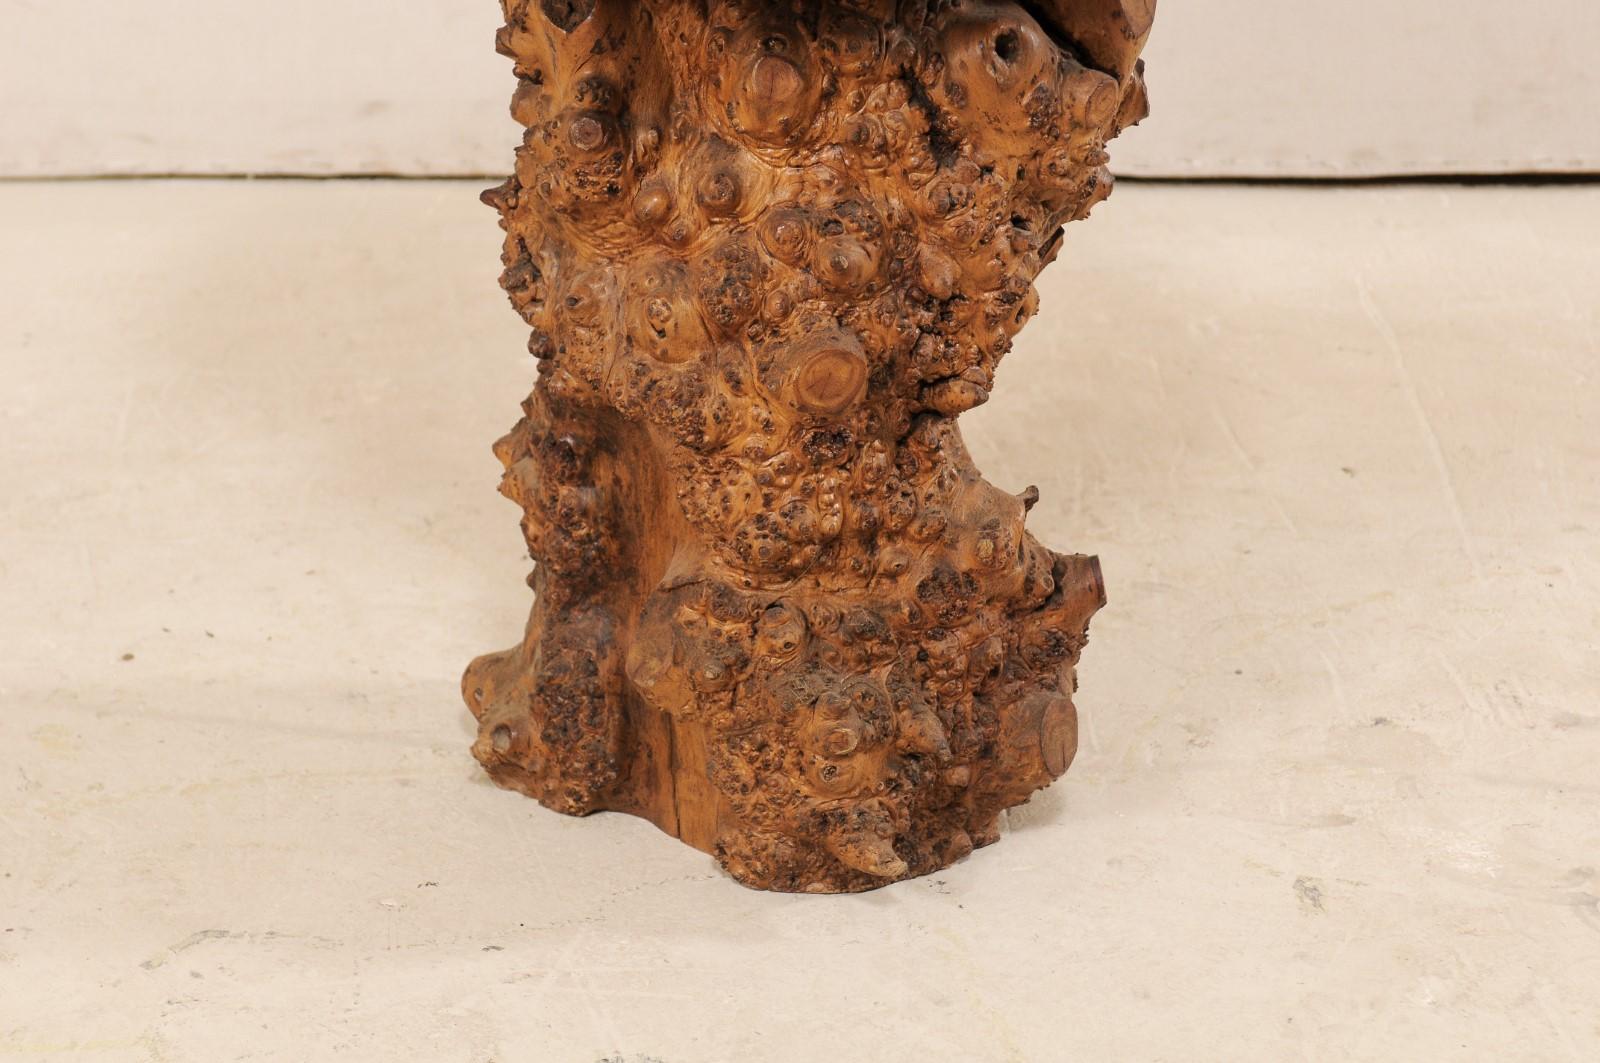 European Live-Edge Burl Side Table with Slab Top & Knobby Texture, Early 20th C. For Sale 5